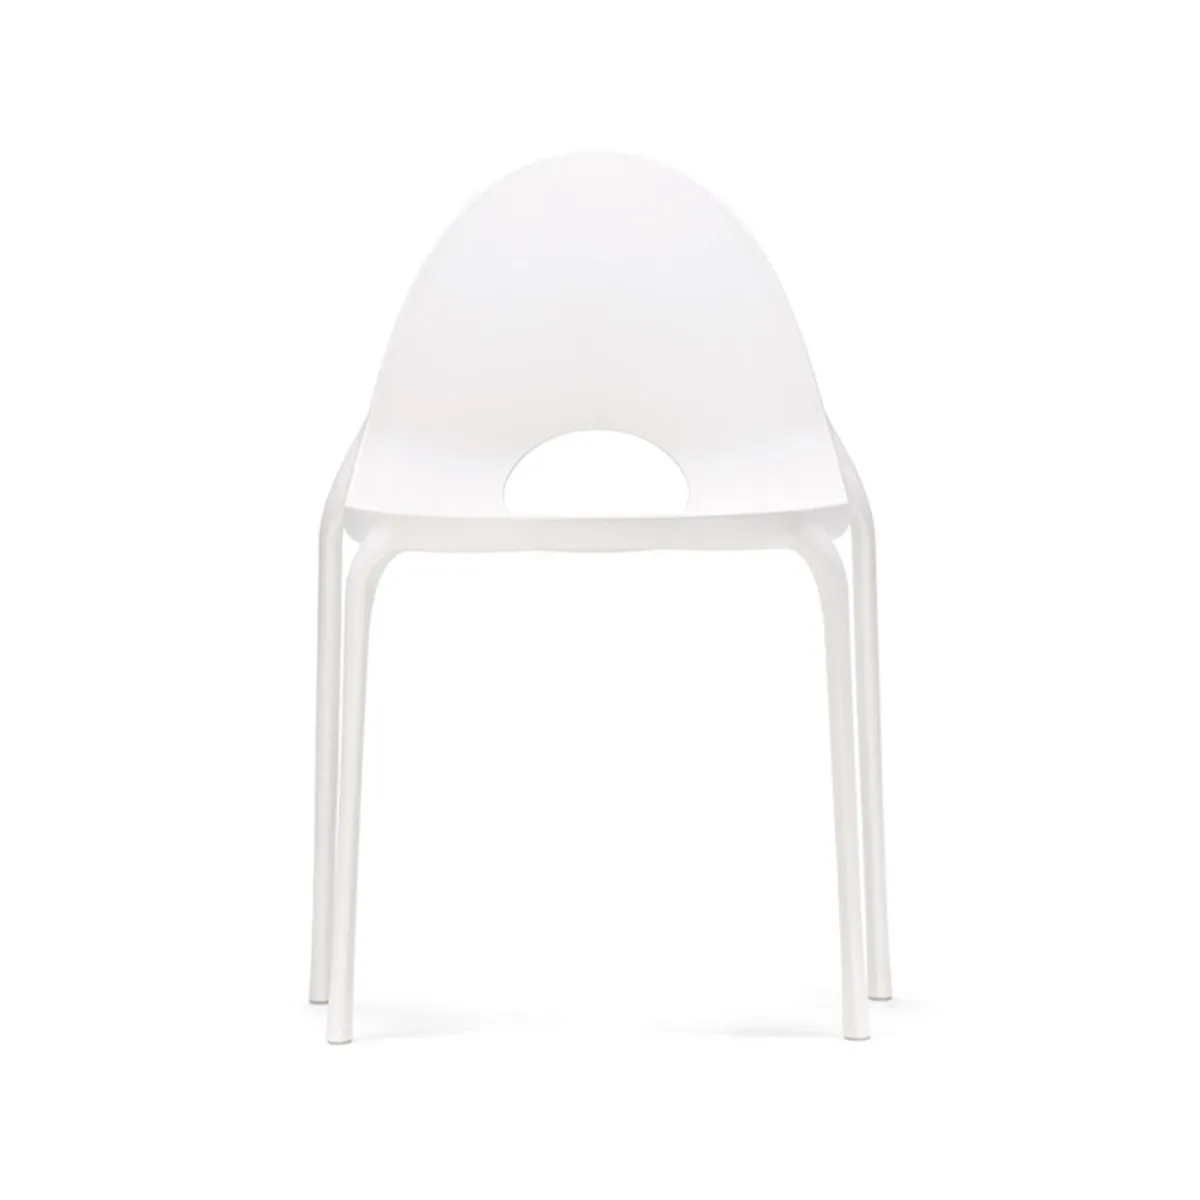 Droplet Chair Pp20 White 01 Inside Out Contracts